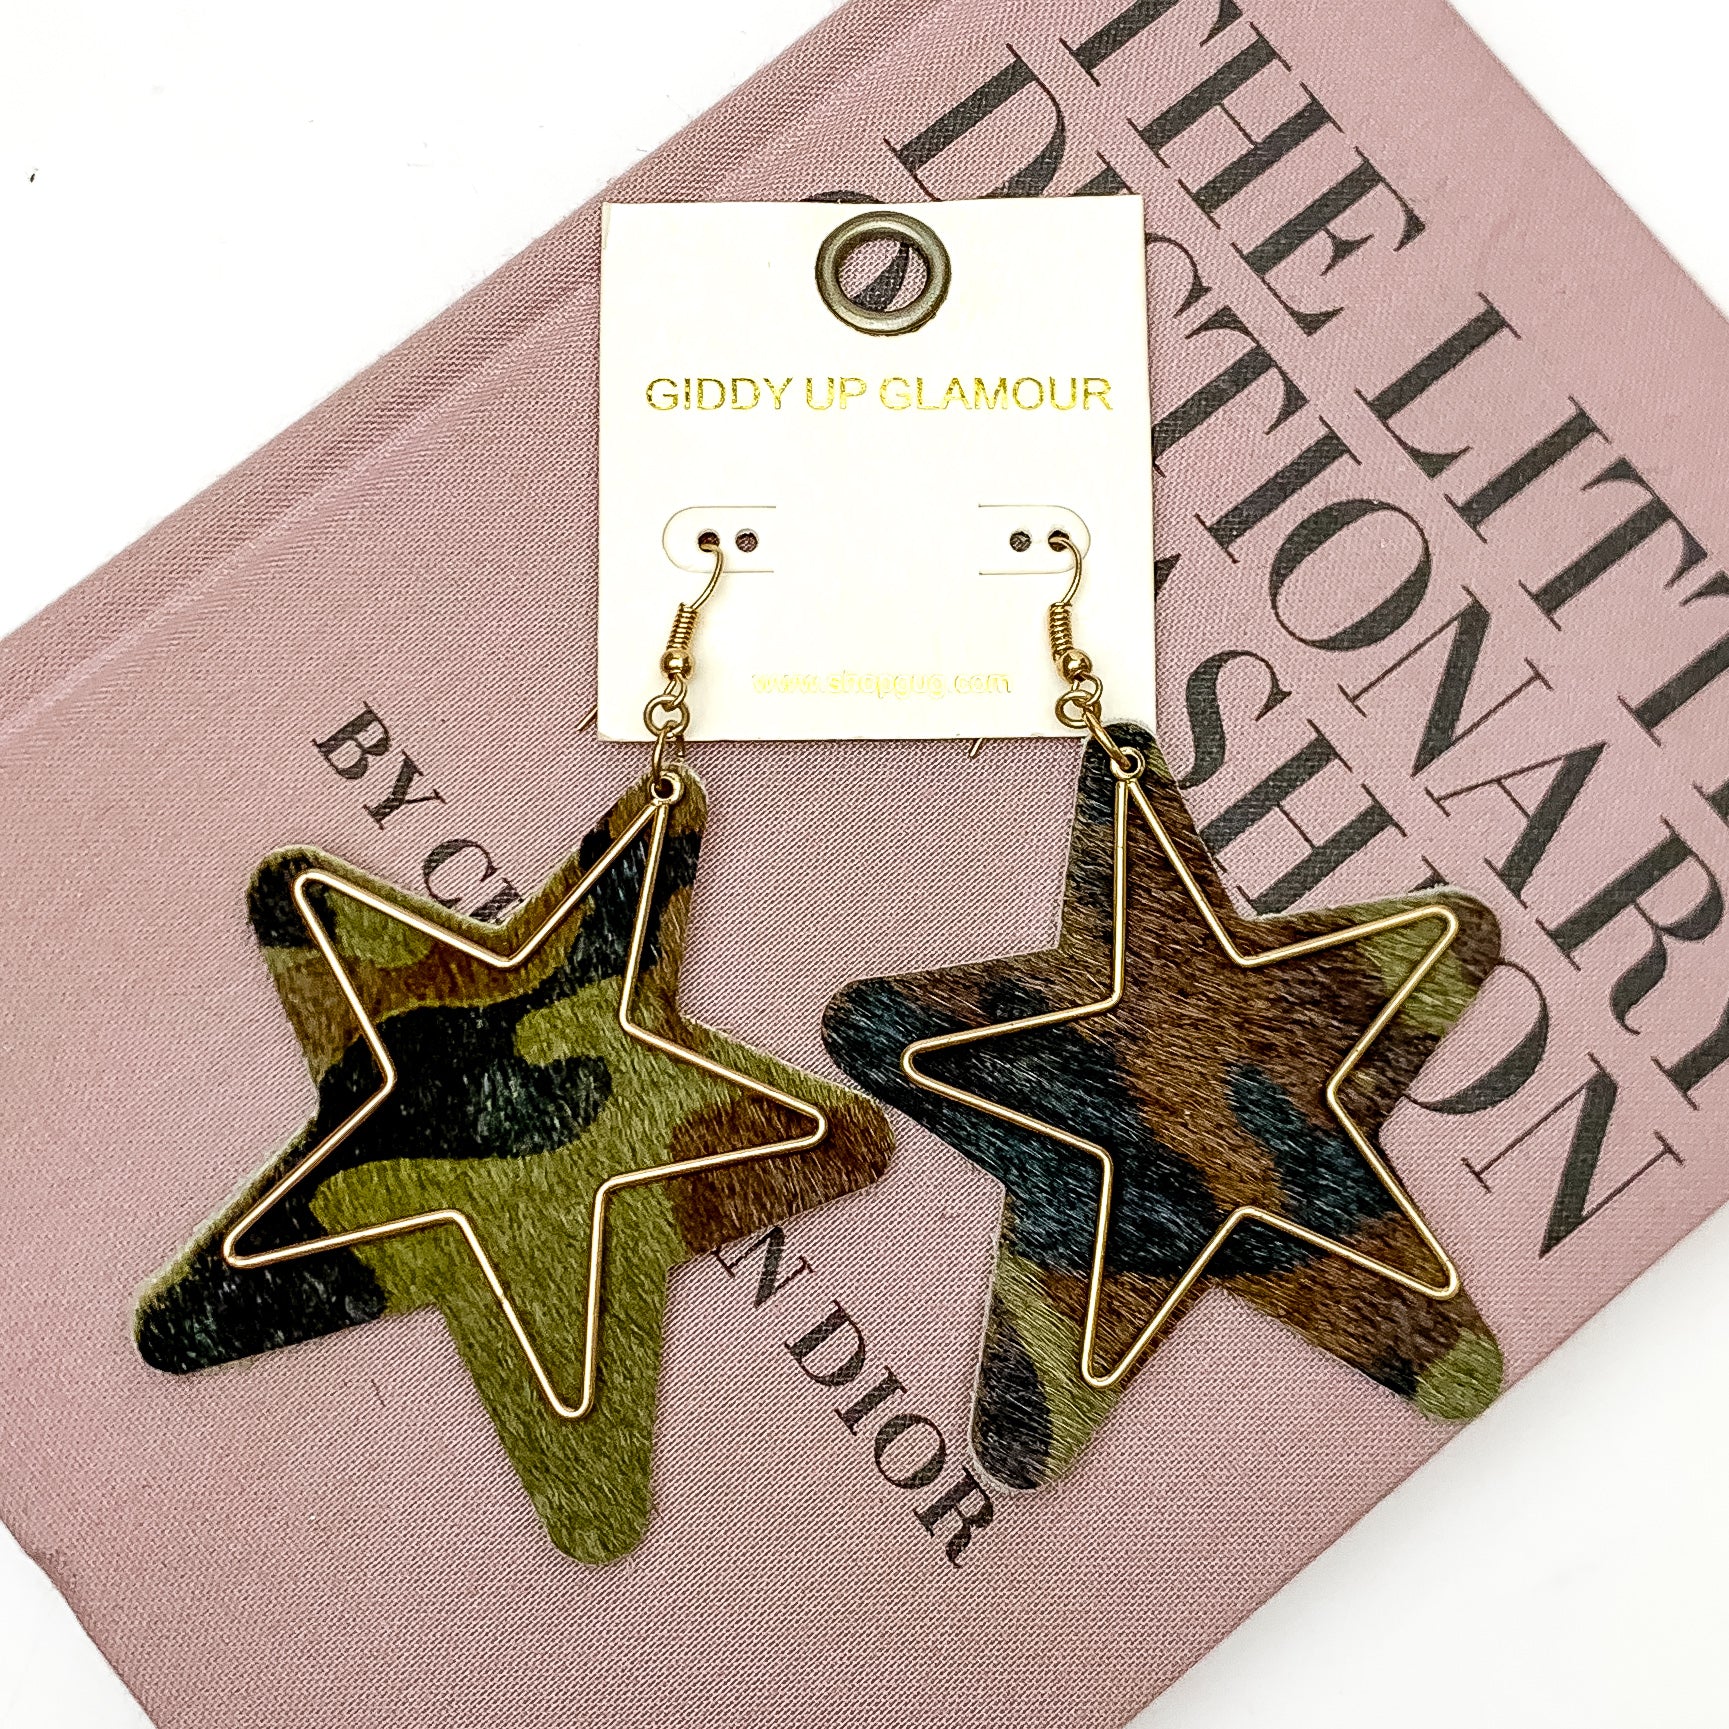 Star Shaped Earrings with Gold Tone Wire Overlay in Camouflage Print - Giddy Up Glamour Boutique